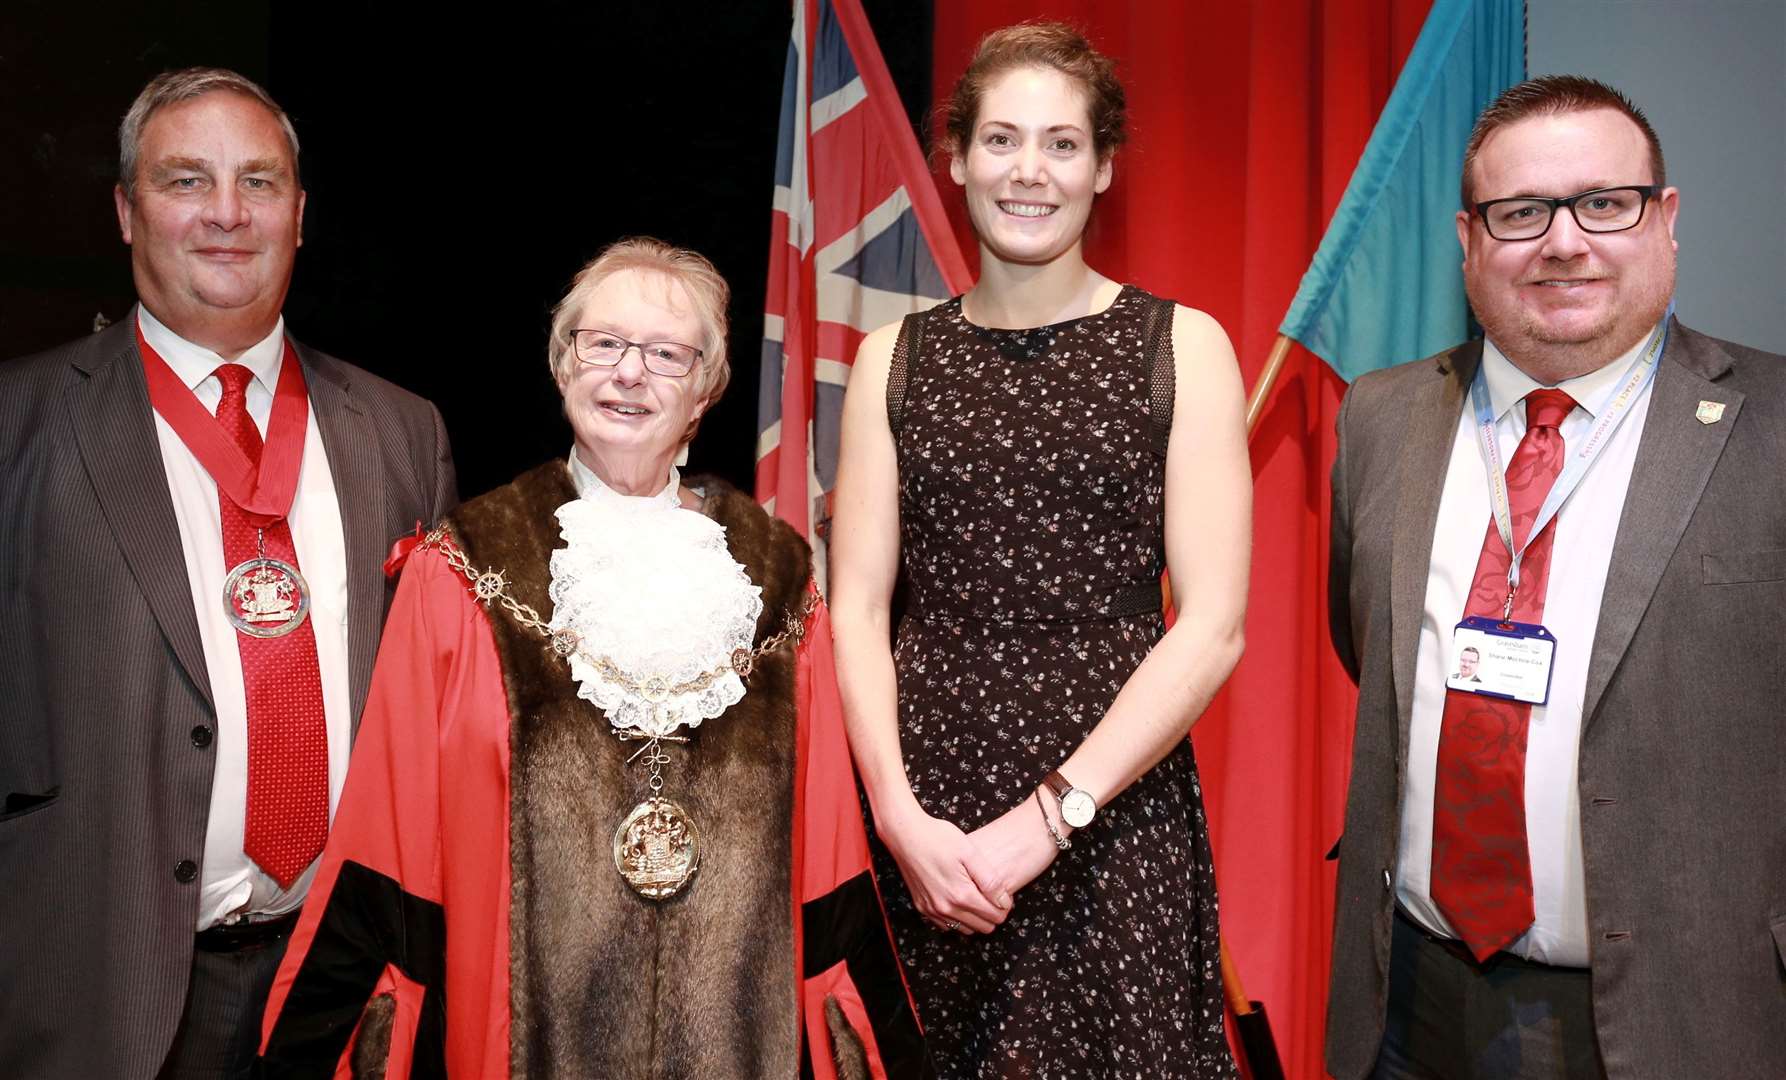 From left: Gravesham council leader John Burden, Mayor Cllr Lyn Milner, Olympian Kate French and Cllr Shane Mochrie-Cox at the Gravesham Civic Awards 2021. Picture Phil Lee/Gravesham council